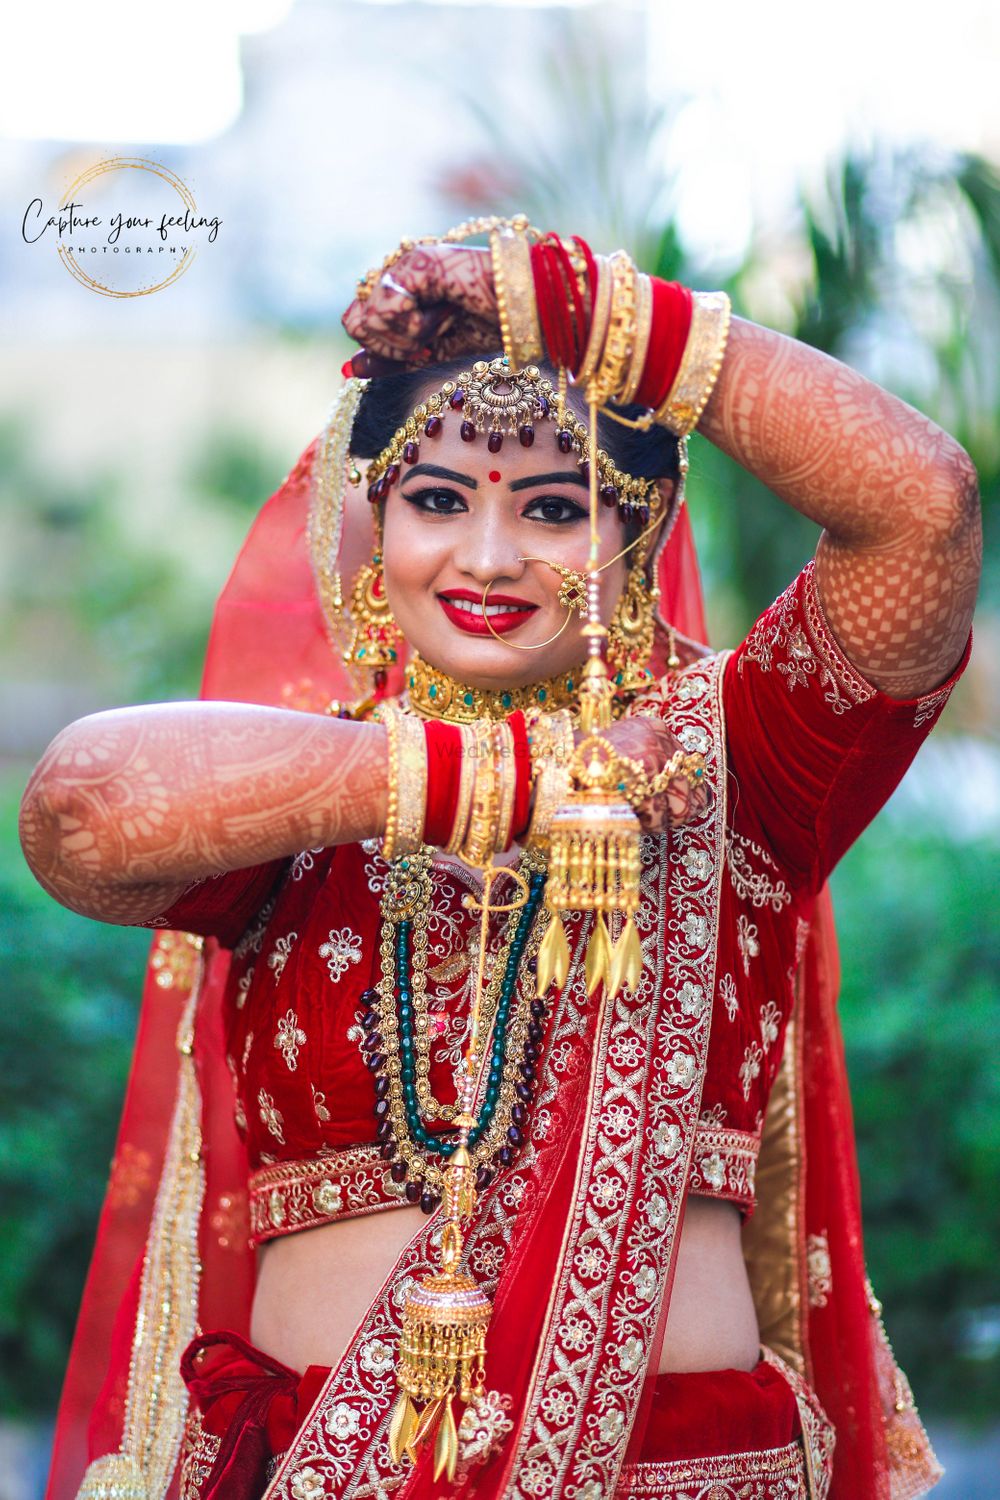 Photo From Sapna weds Milan - By Capture Your Feeling 